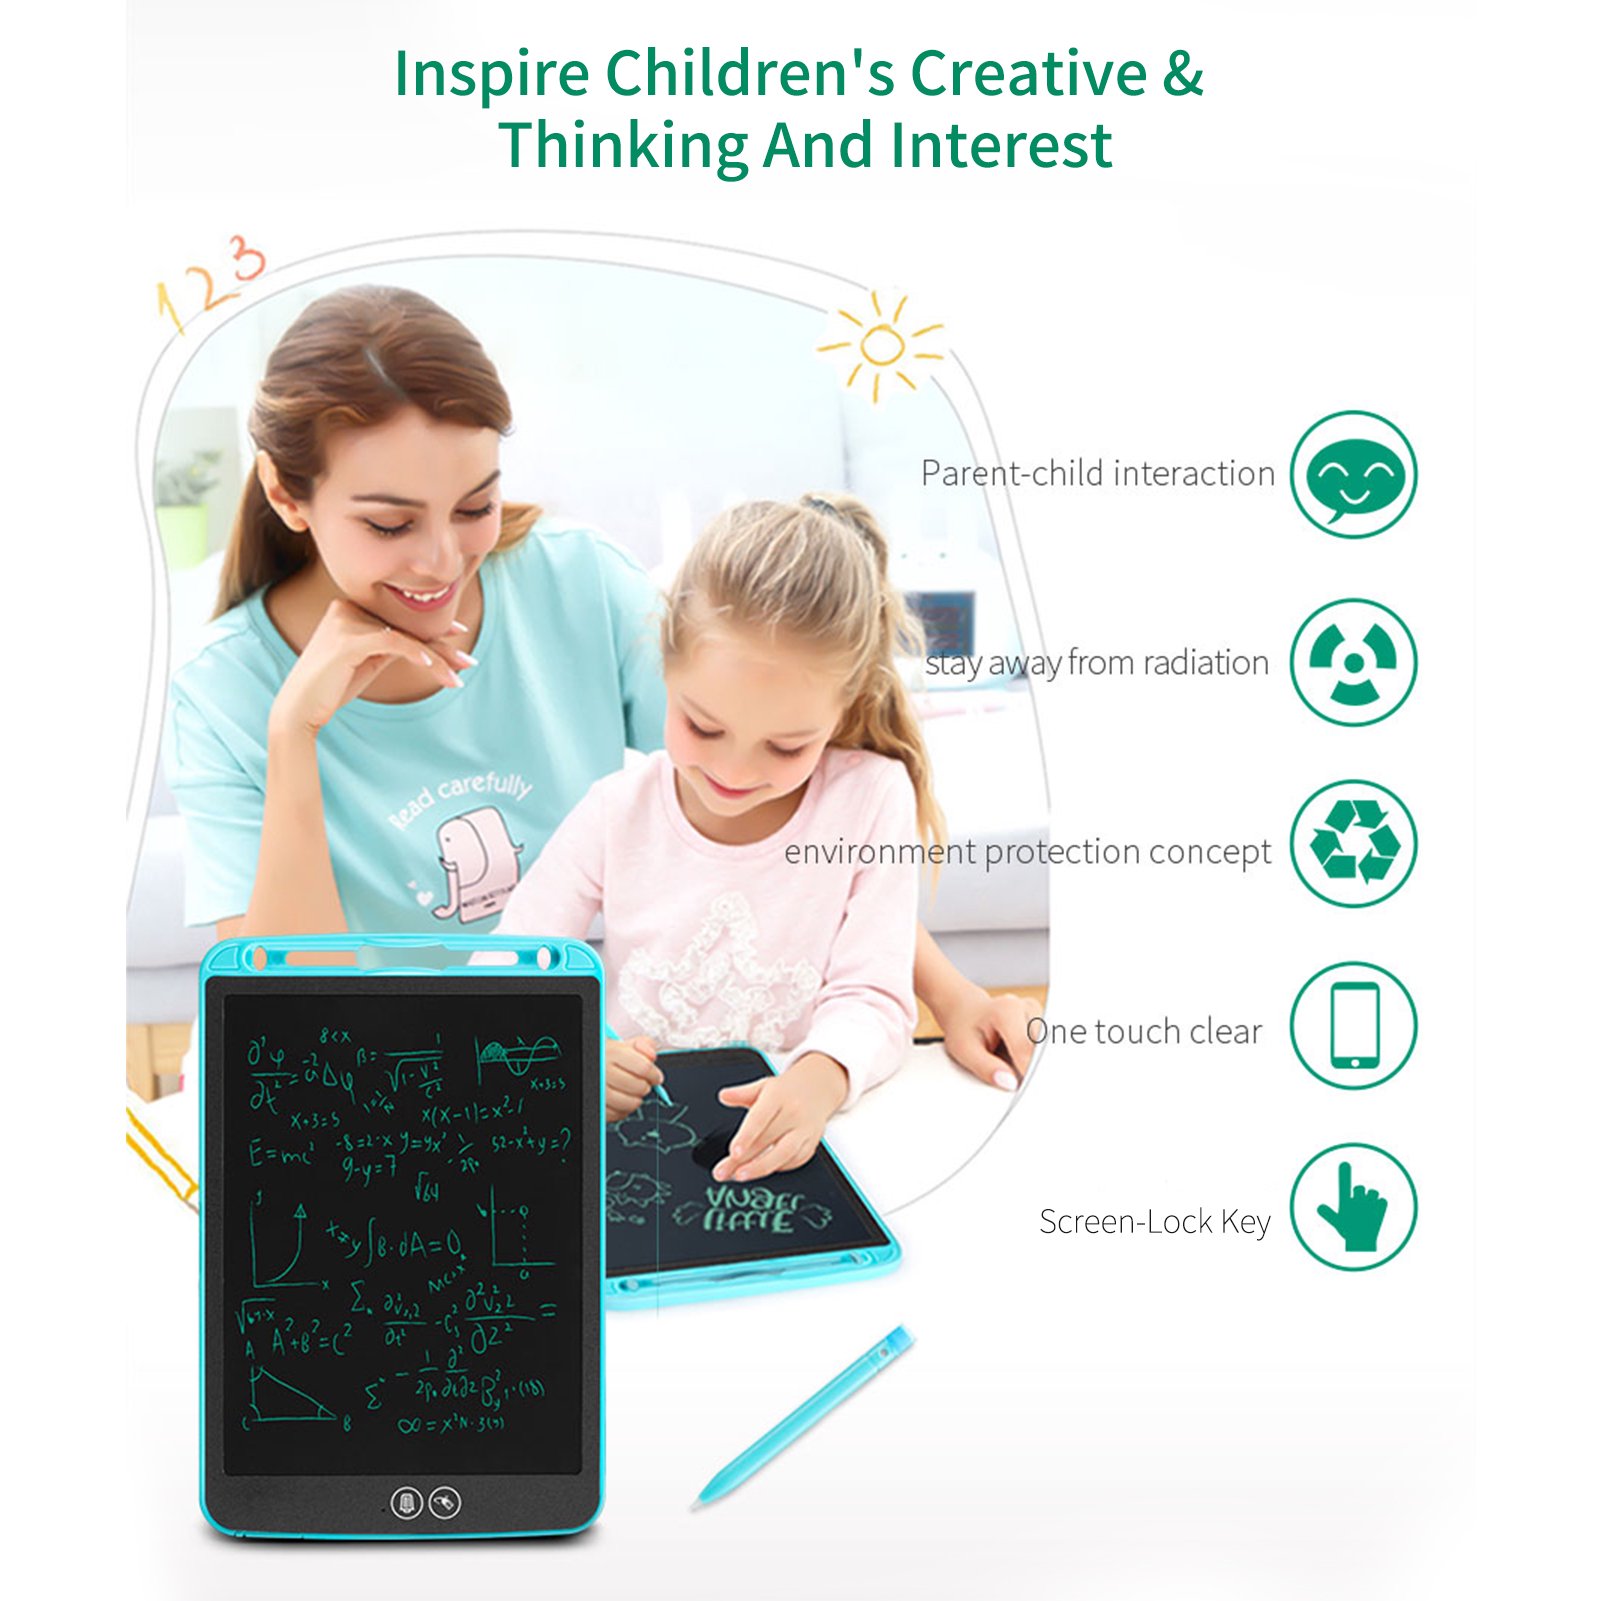 Drawing-Colouring-Painting-Graphic-Drawing-Tablet-12-Inch-Colorful-LCD-Writing-Board-Graphics-Tablet-for-Kids-Pressure-Sensitivity-Partial-Erasable-Convenient-for-study-work-46